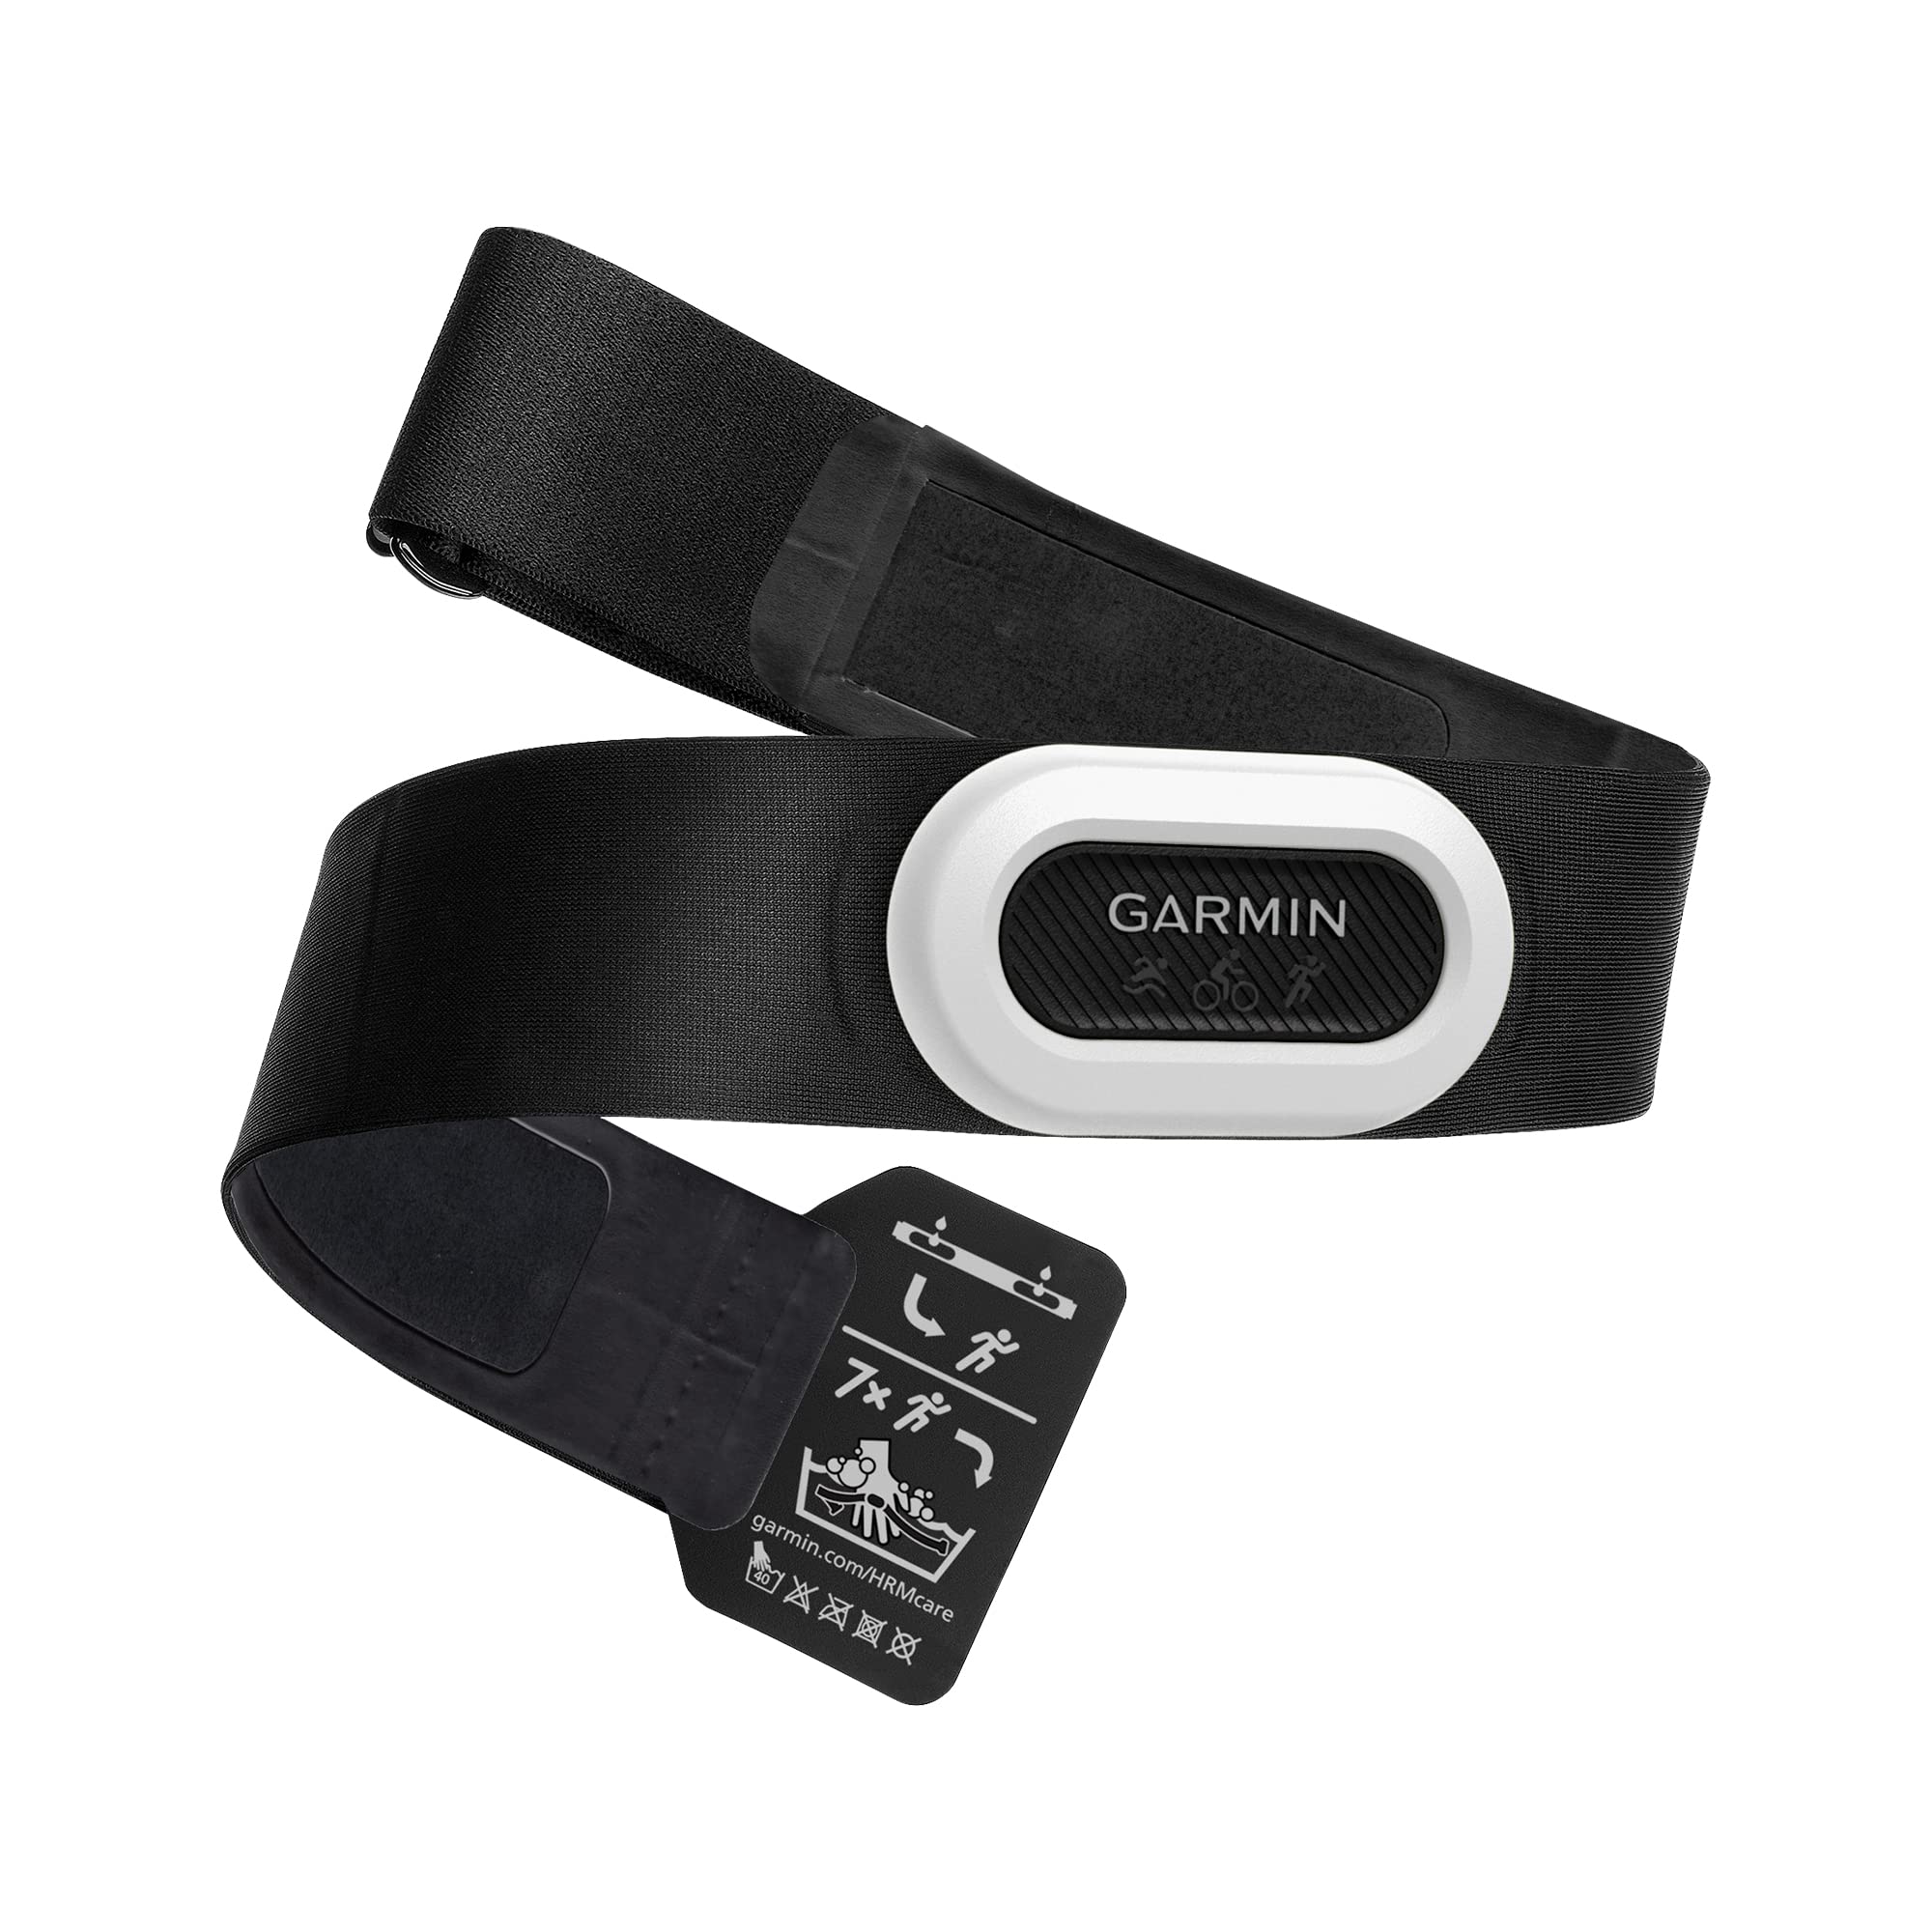 Garmin HRM-Pro Plus Chest Strap Heart Rate Monitor w/ Real Time Heart Rate + HRV Transmission via Bluetooth Low Energy 3 (010-13118-00) $100.35 + Free Shipping